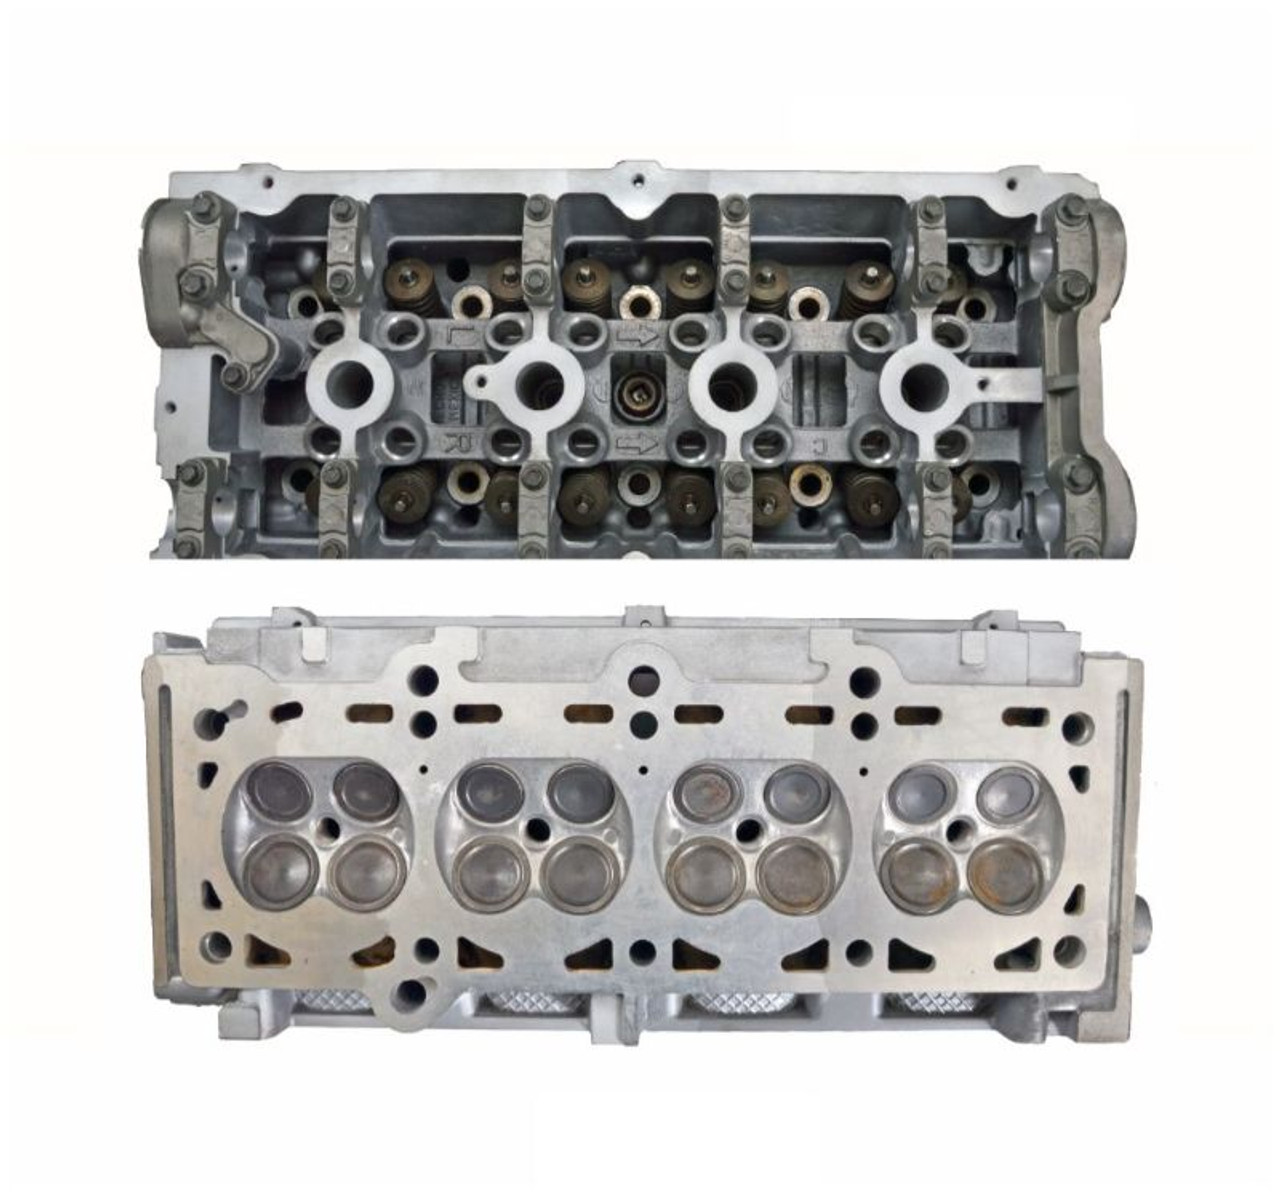 2002 Dodge Stratus 2.4L Engine Cylinder Head Assembly CH1076R -5